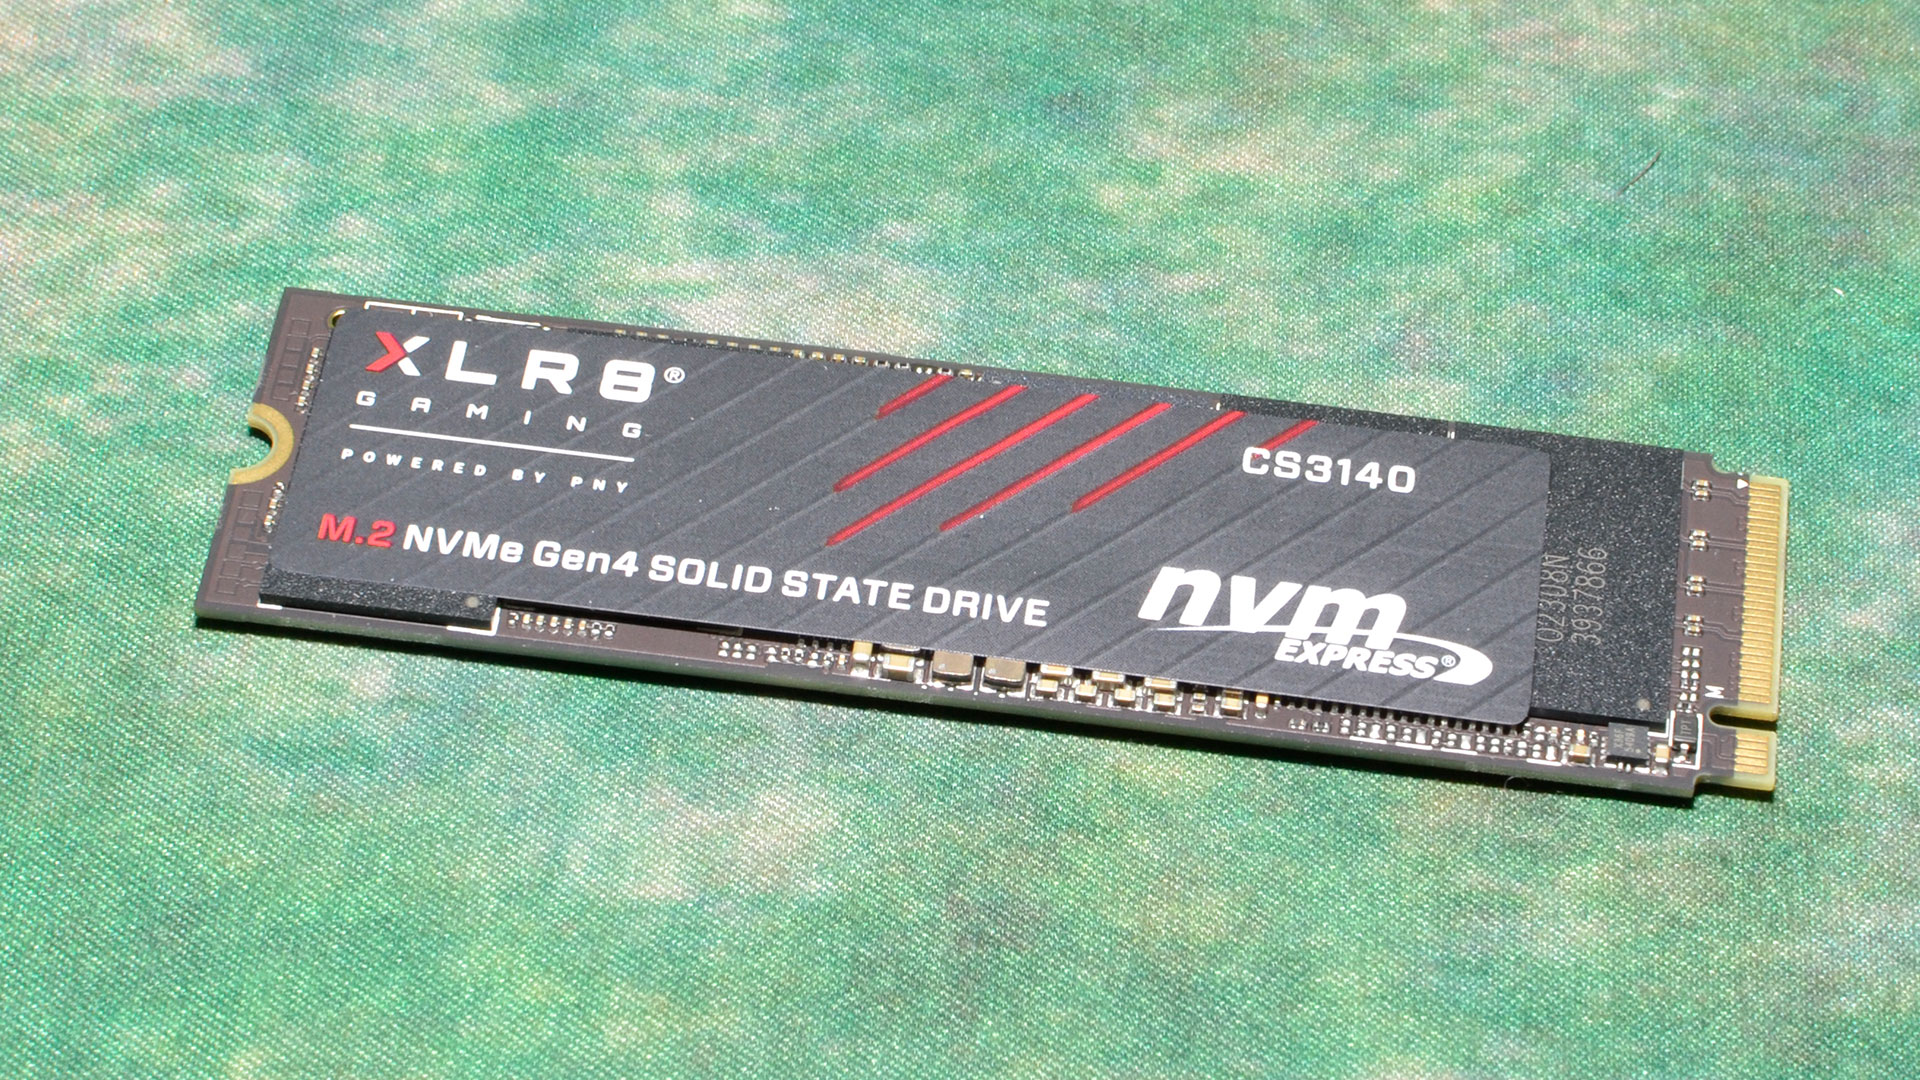 PNY Optima SSD Series Review (240 GB) - New Controller and a